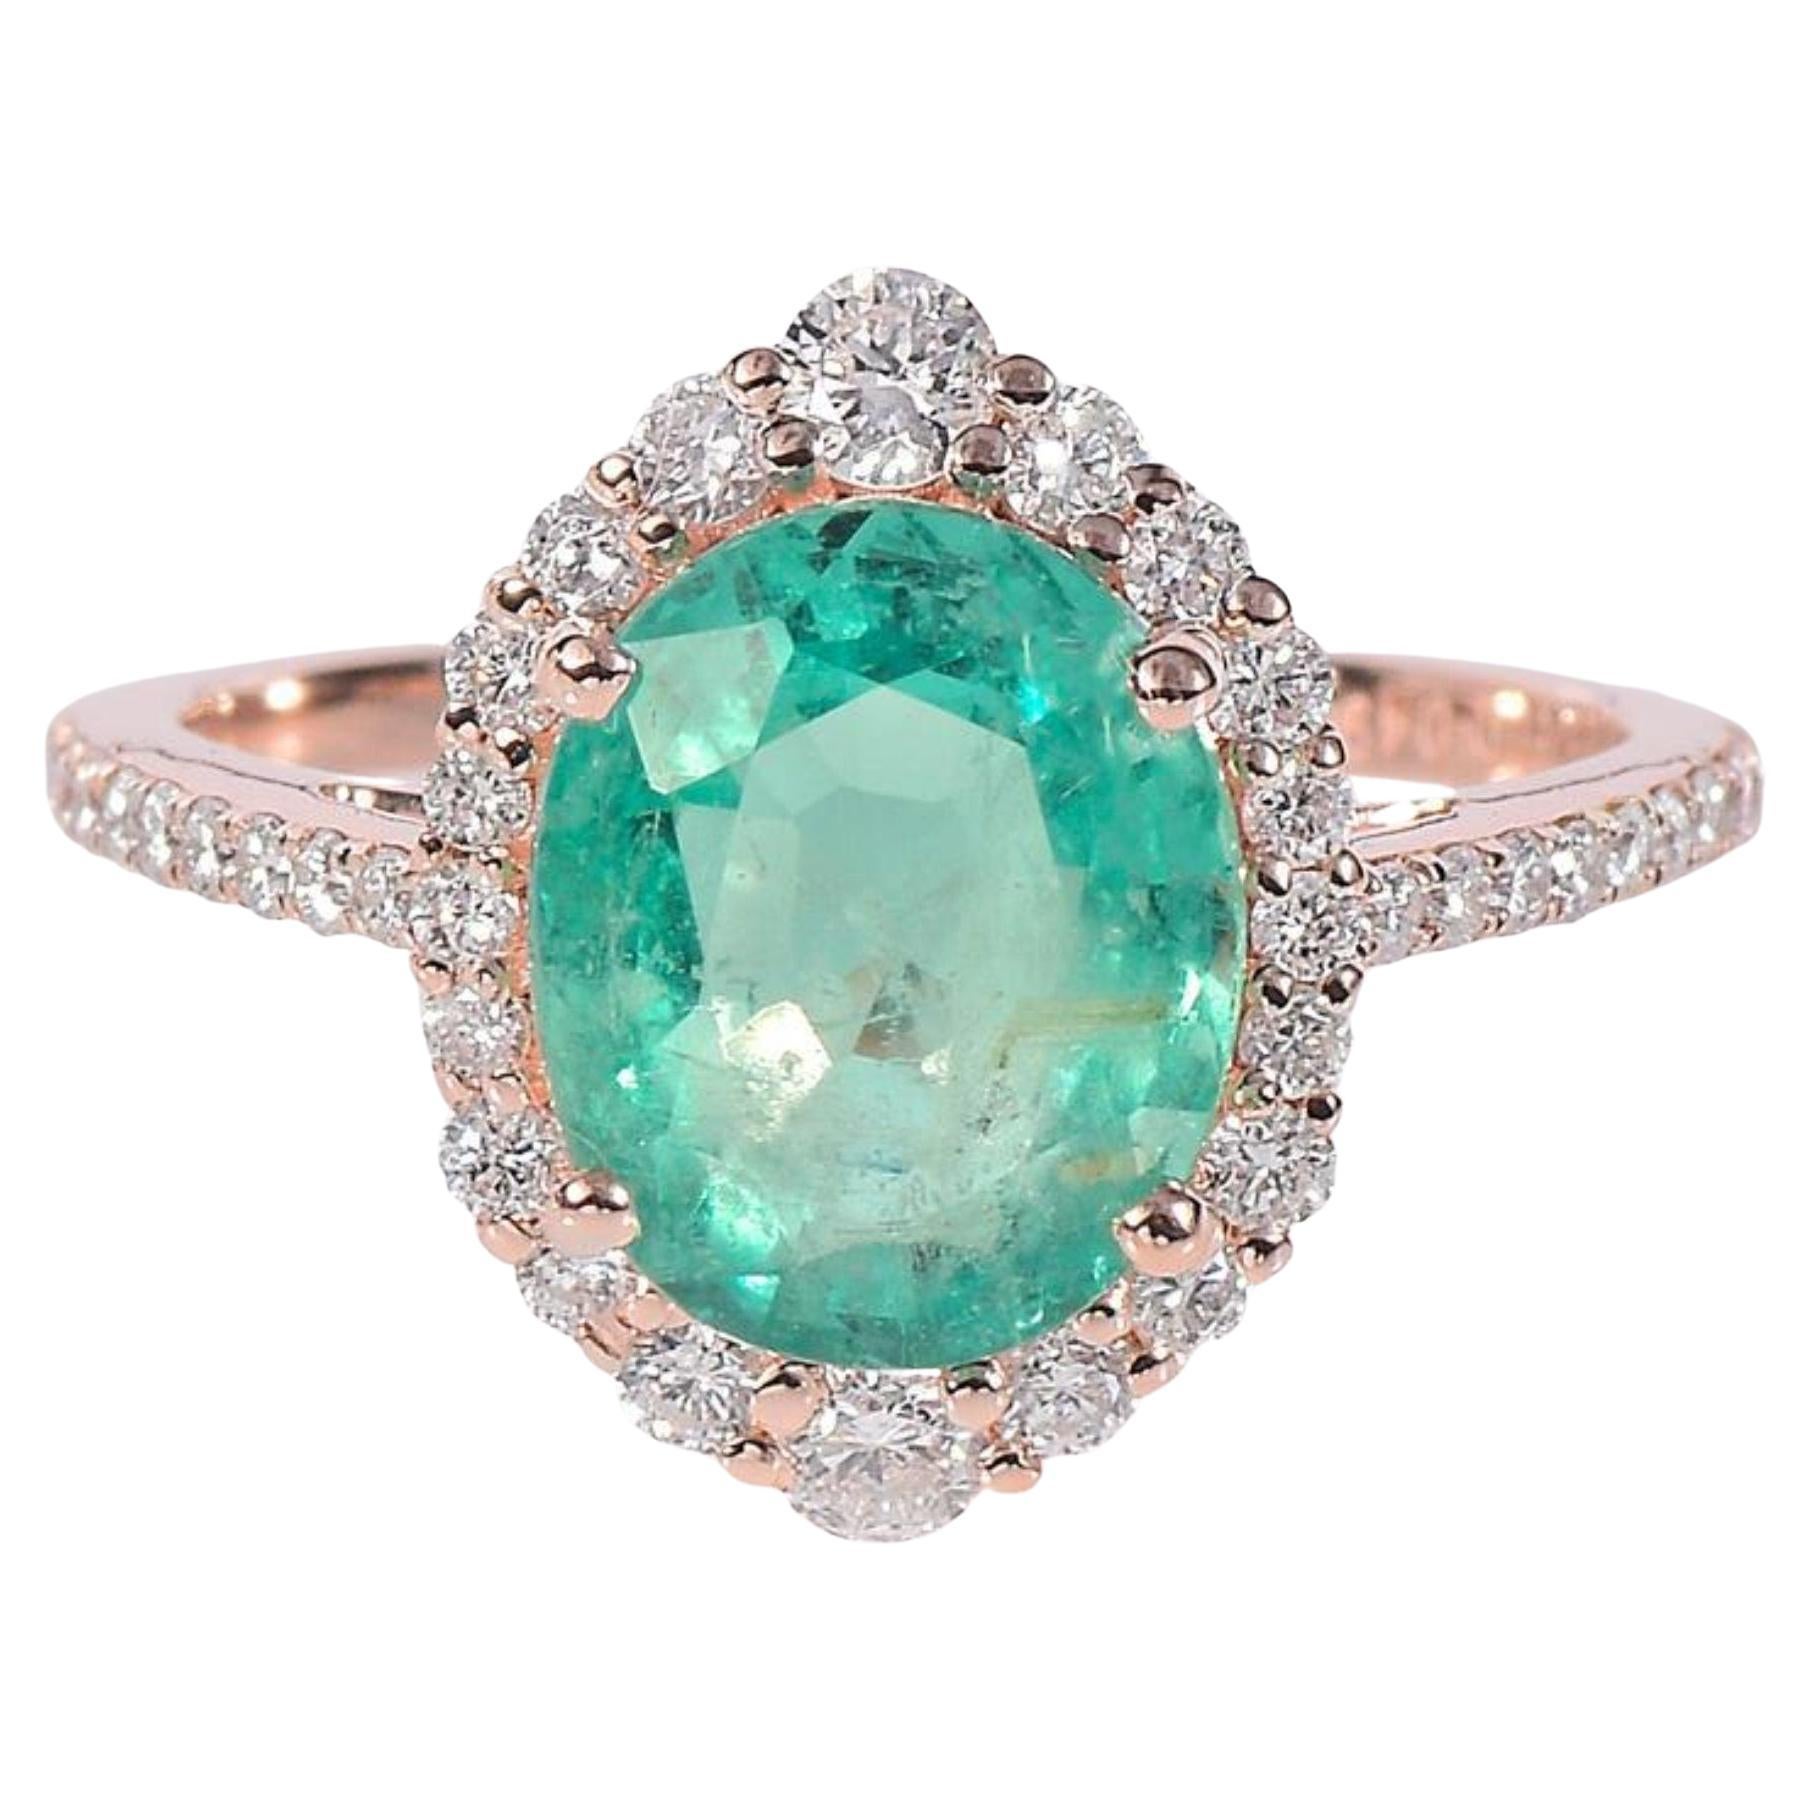 For Sale:  18K Gold 2 CT Natural Emerald and Diamond Antique Art Deco Style Engagement Ring